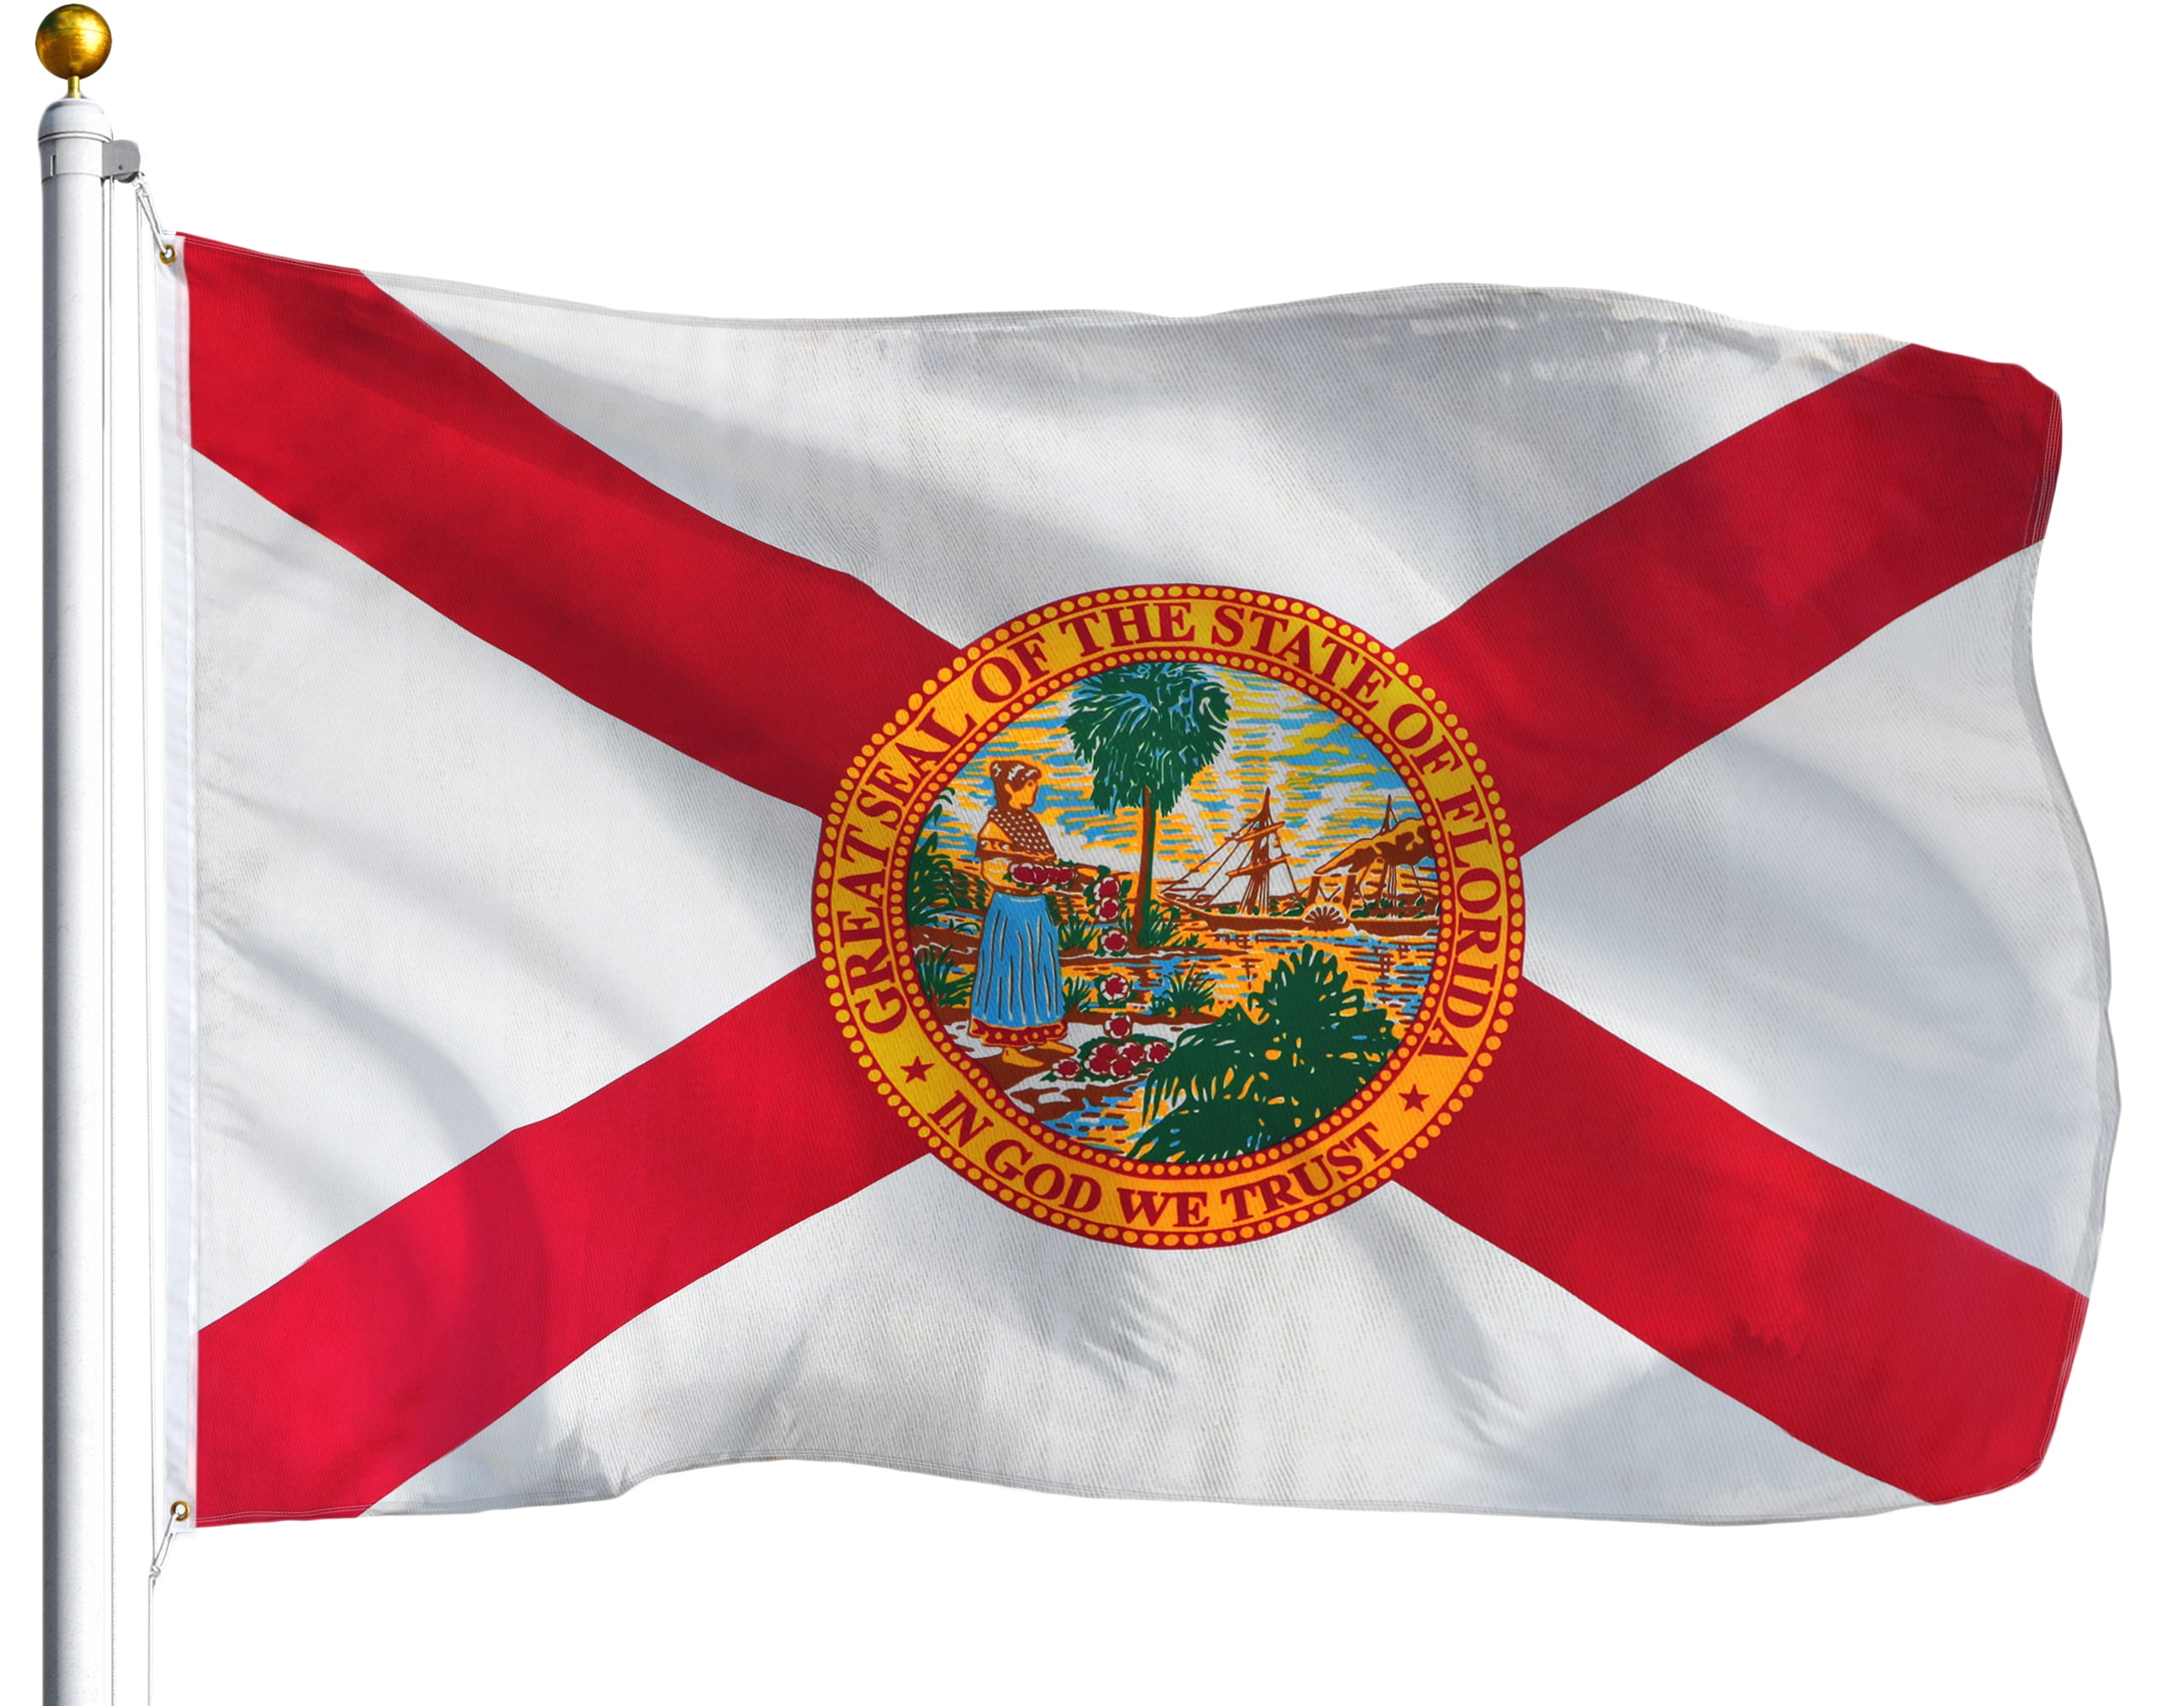 Wholesale Lot of 12 State of Florida 4"x6" Desk Table Stick Flag 